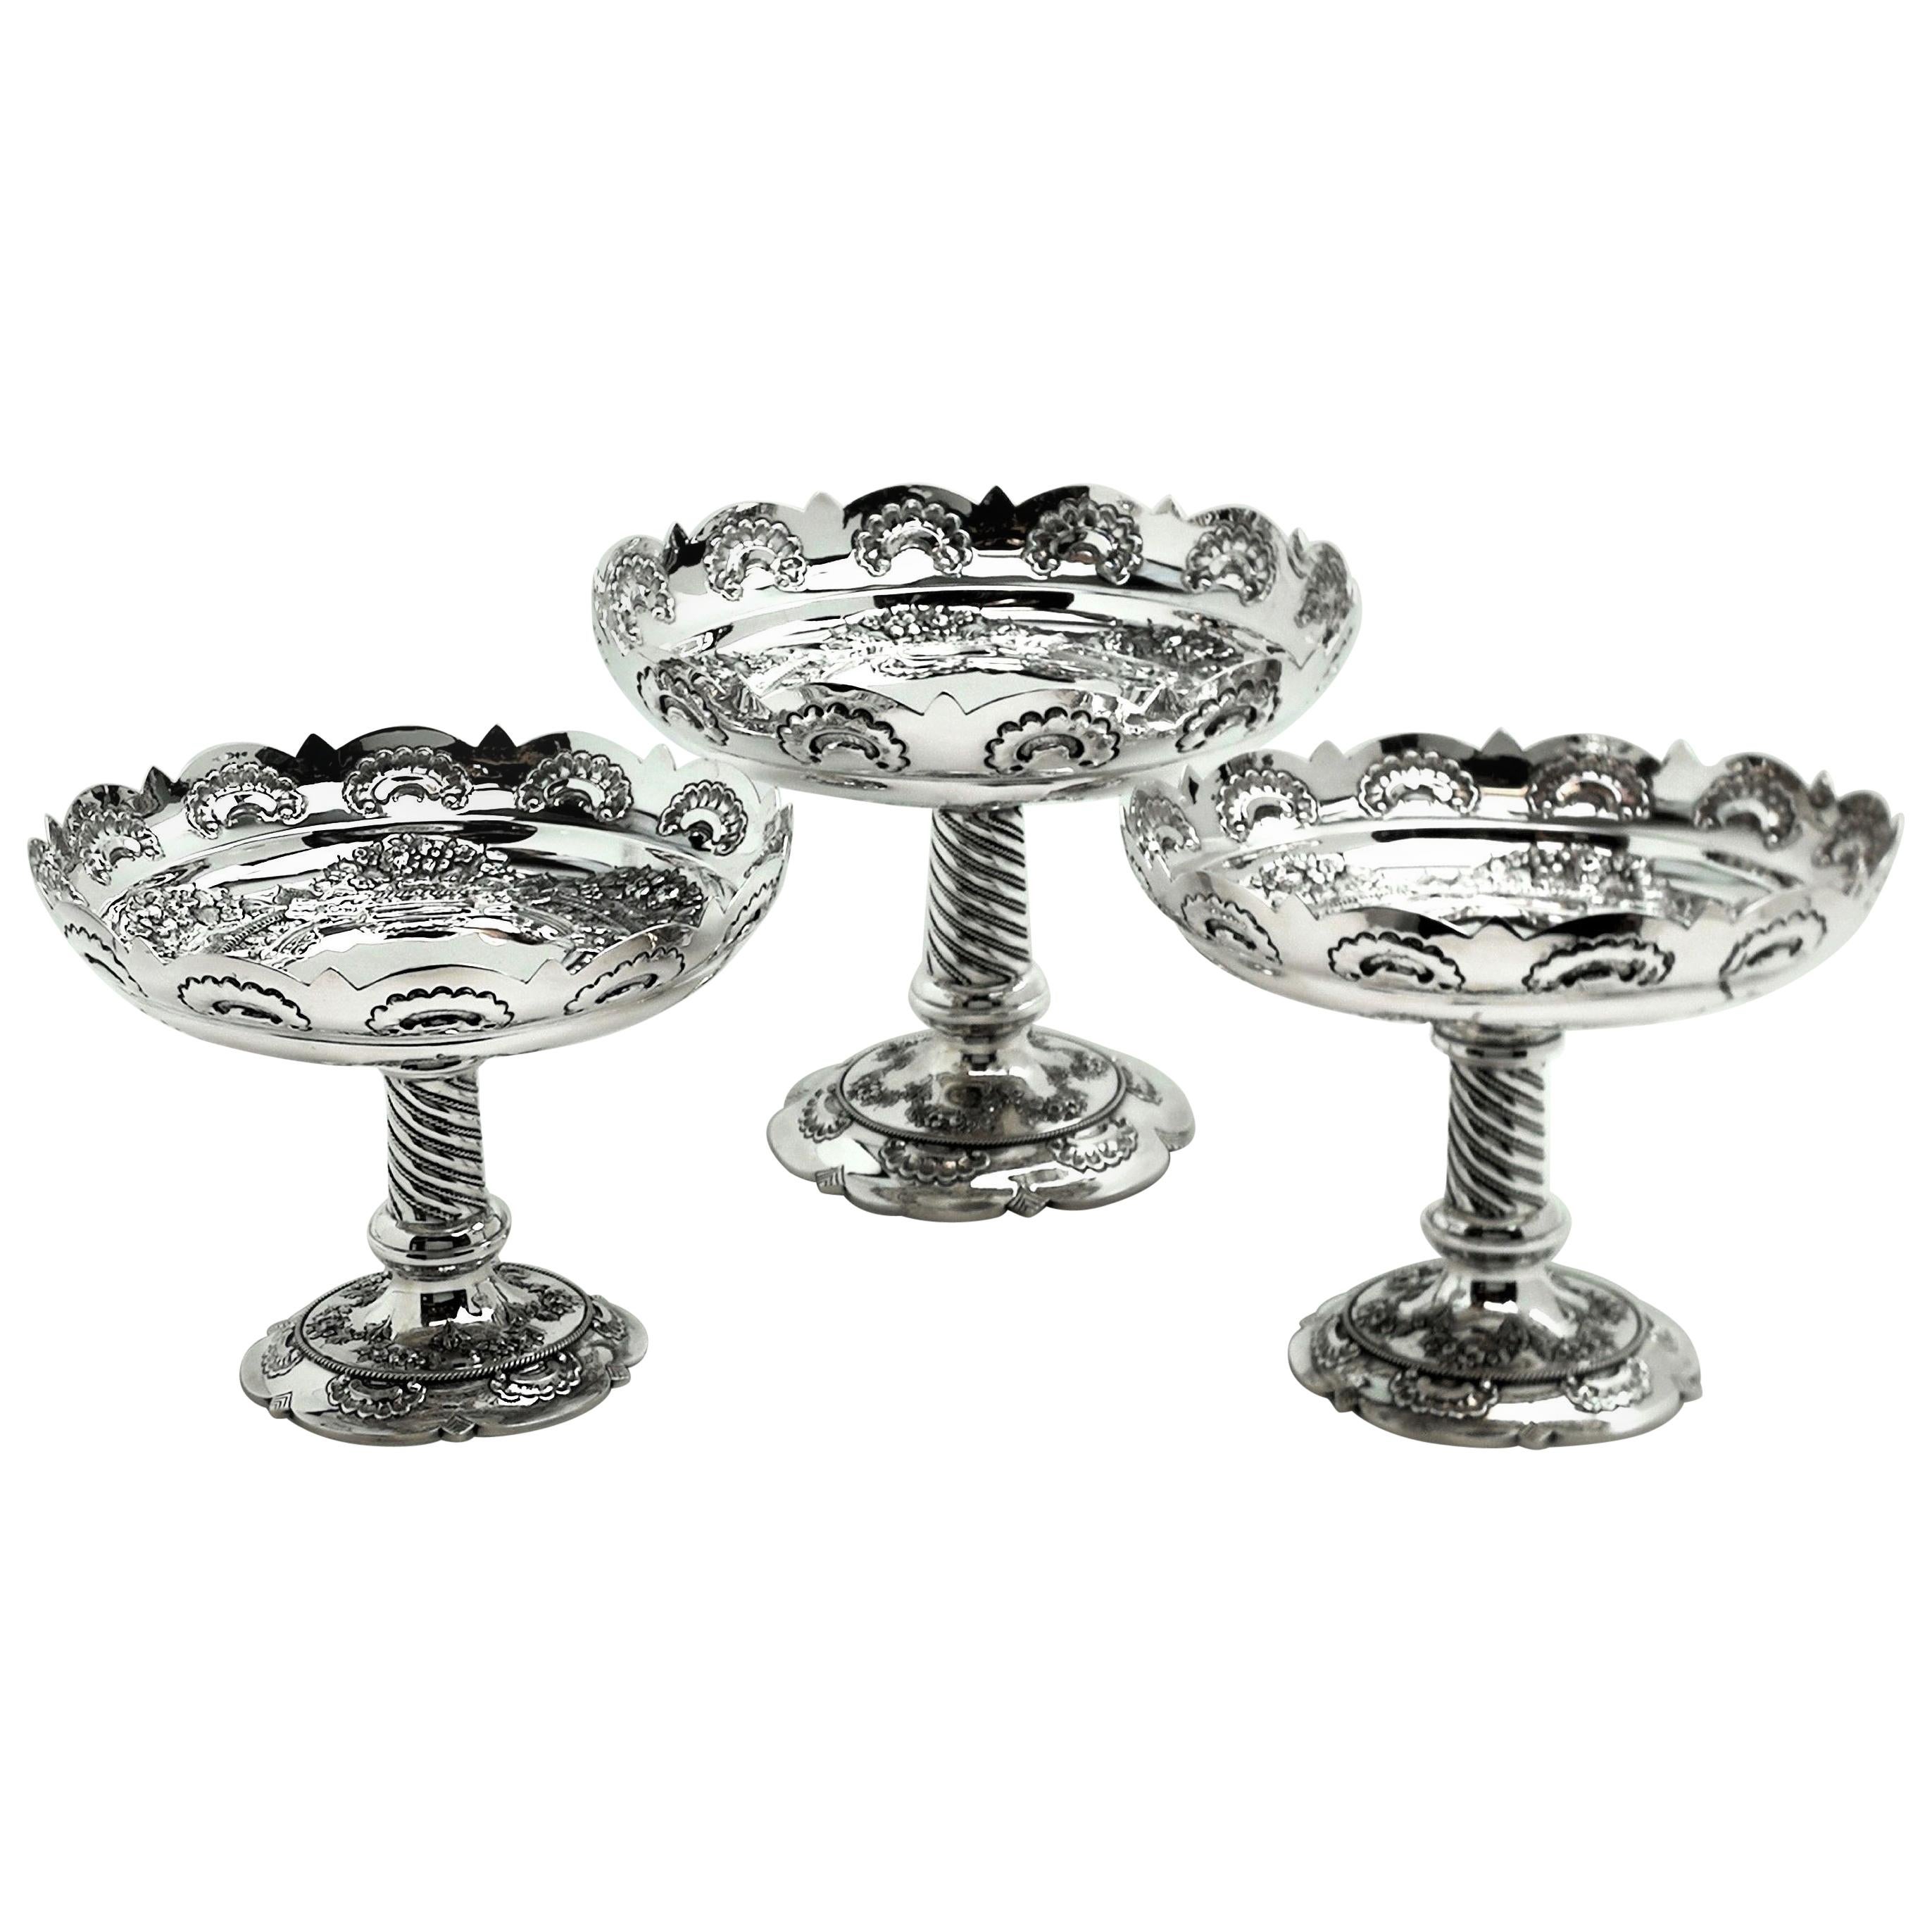 Suite of 3 Antique Victorian Silver Comports / Dishes 1892 / 93 Centrepiece For Sale